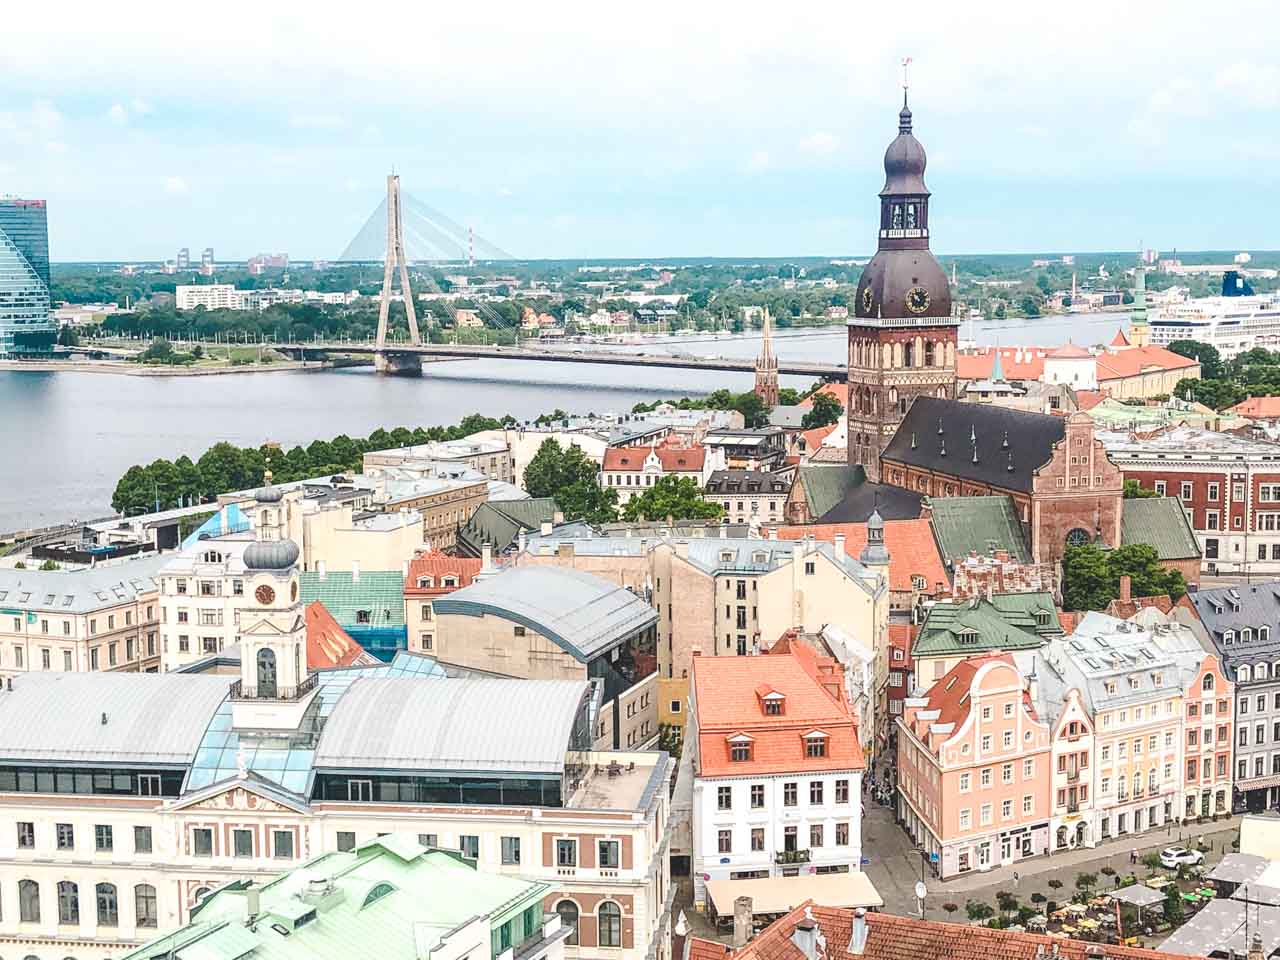 View of Riga Old Town from the tower of St. Peter's Church